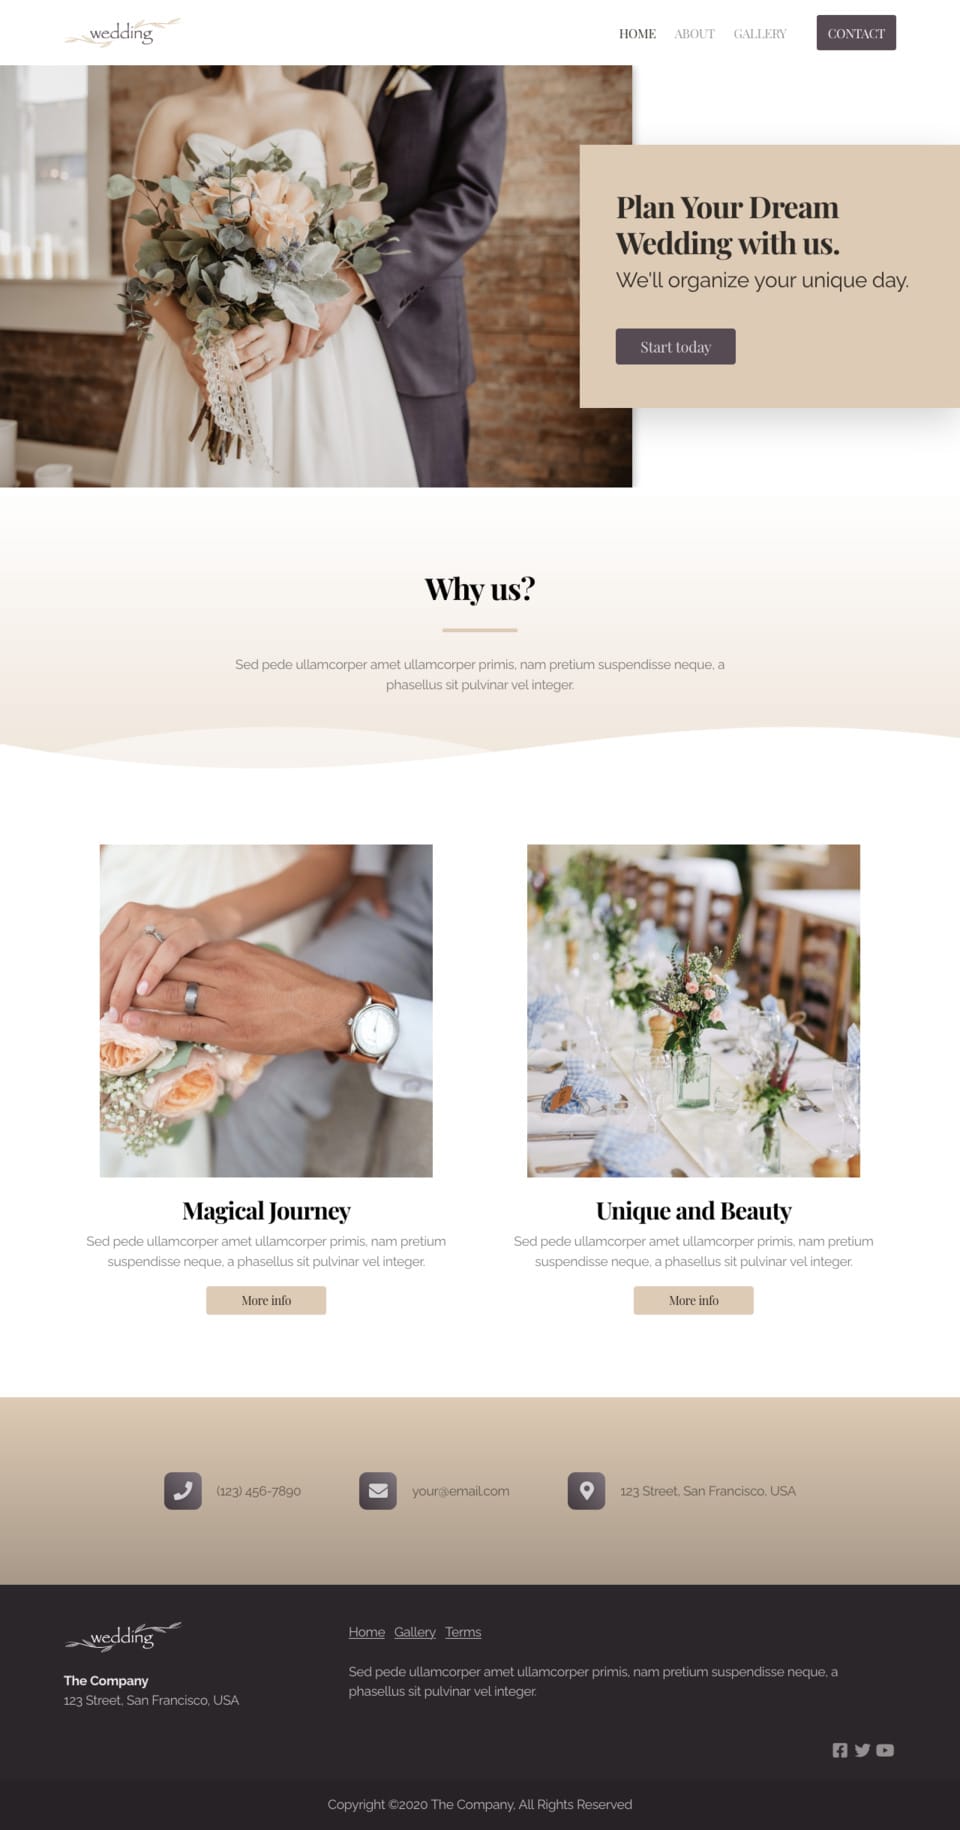 Wedding Website Template - Perfect for engaged couples, wedding planners, photographers, or anyone involved in the wedding industry.